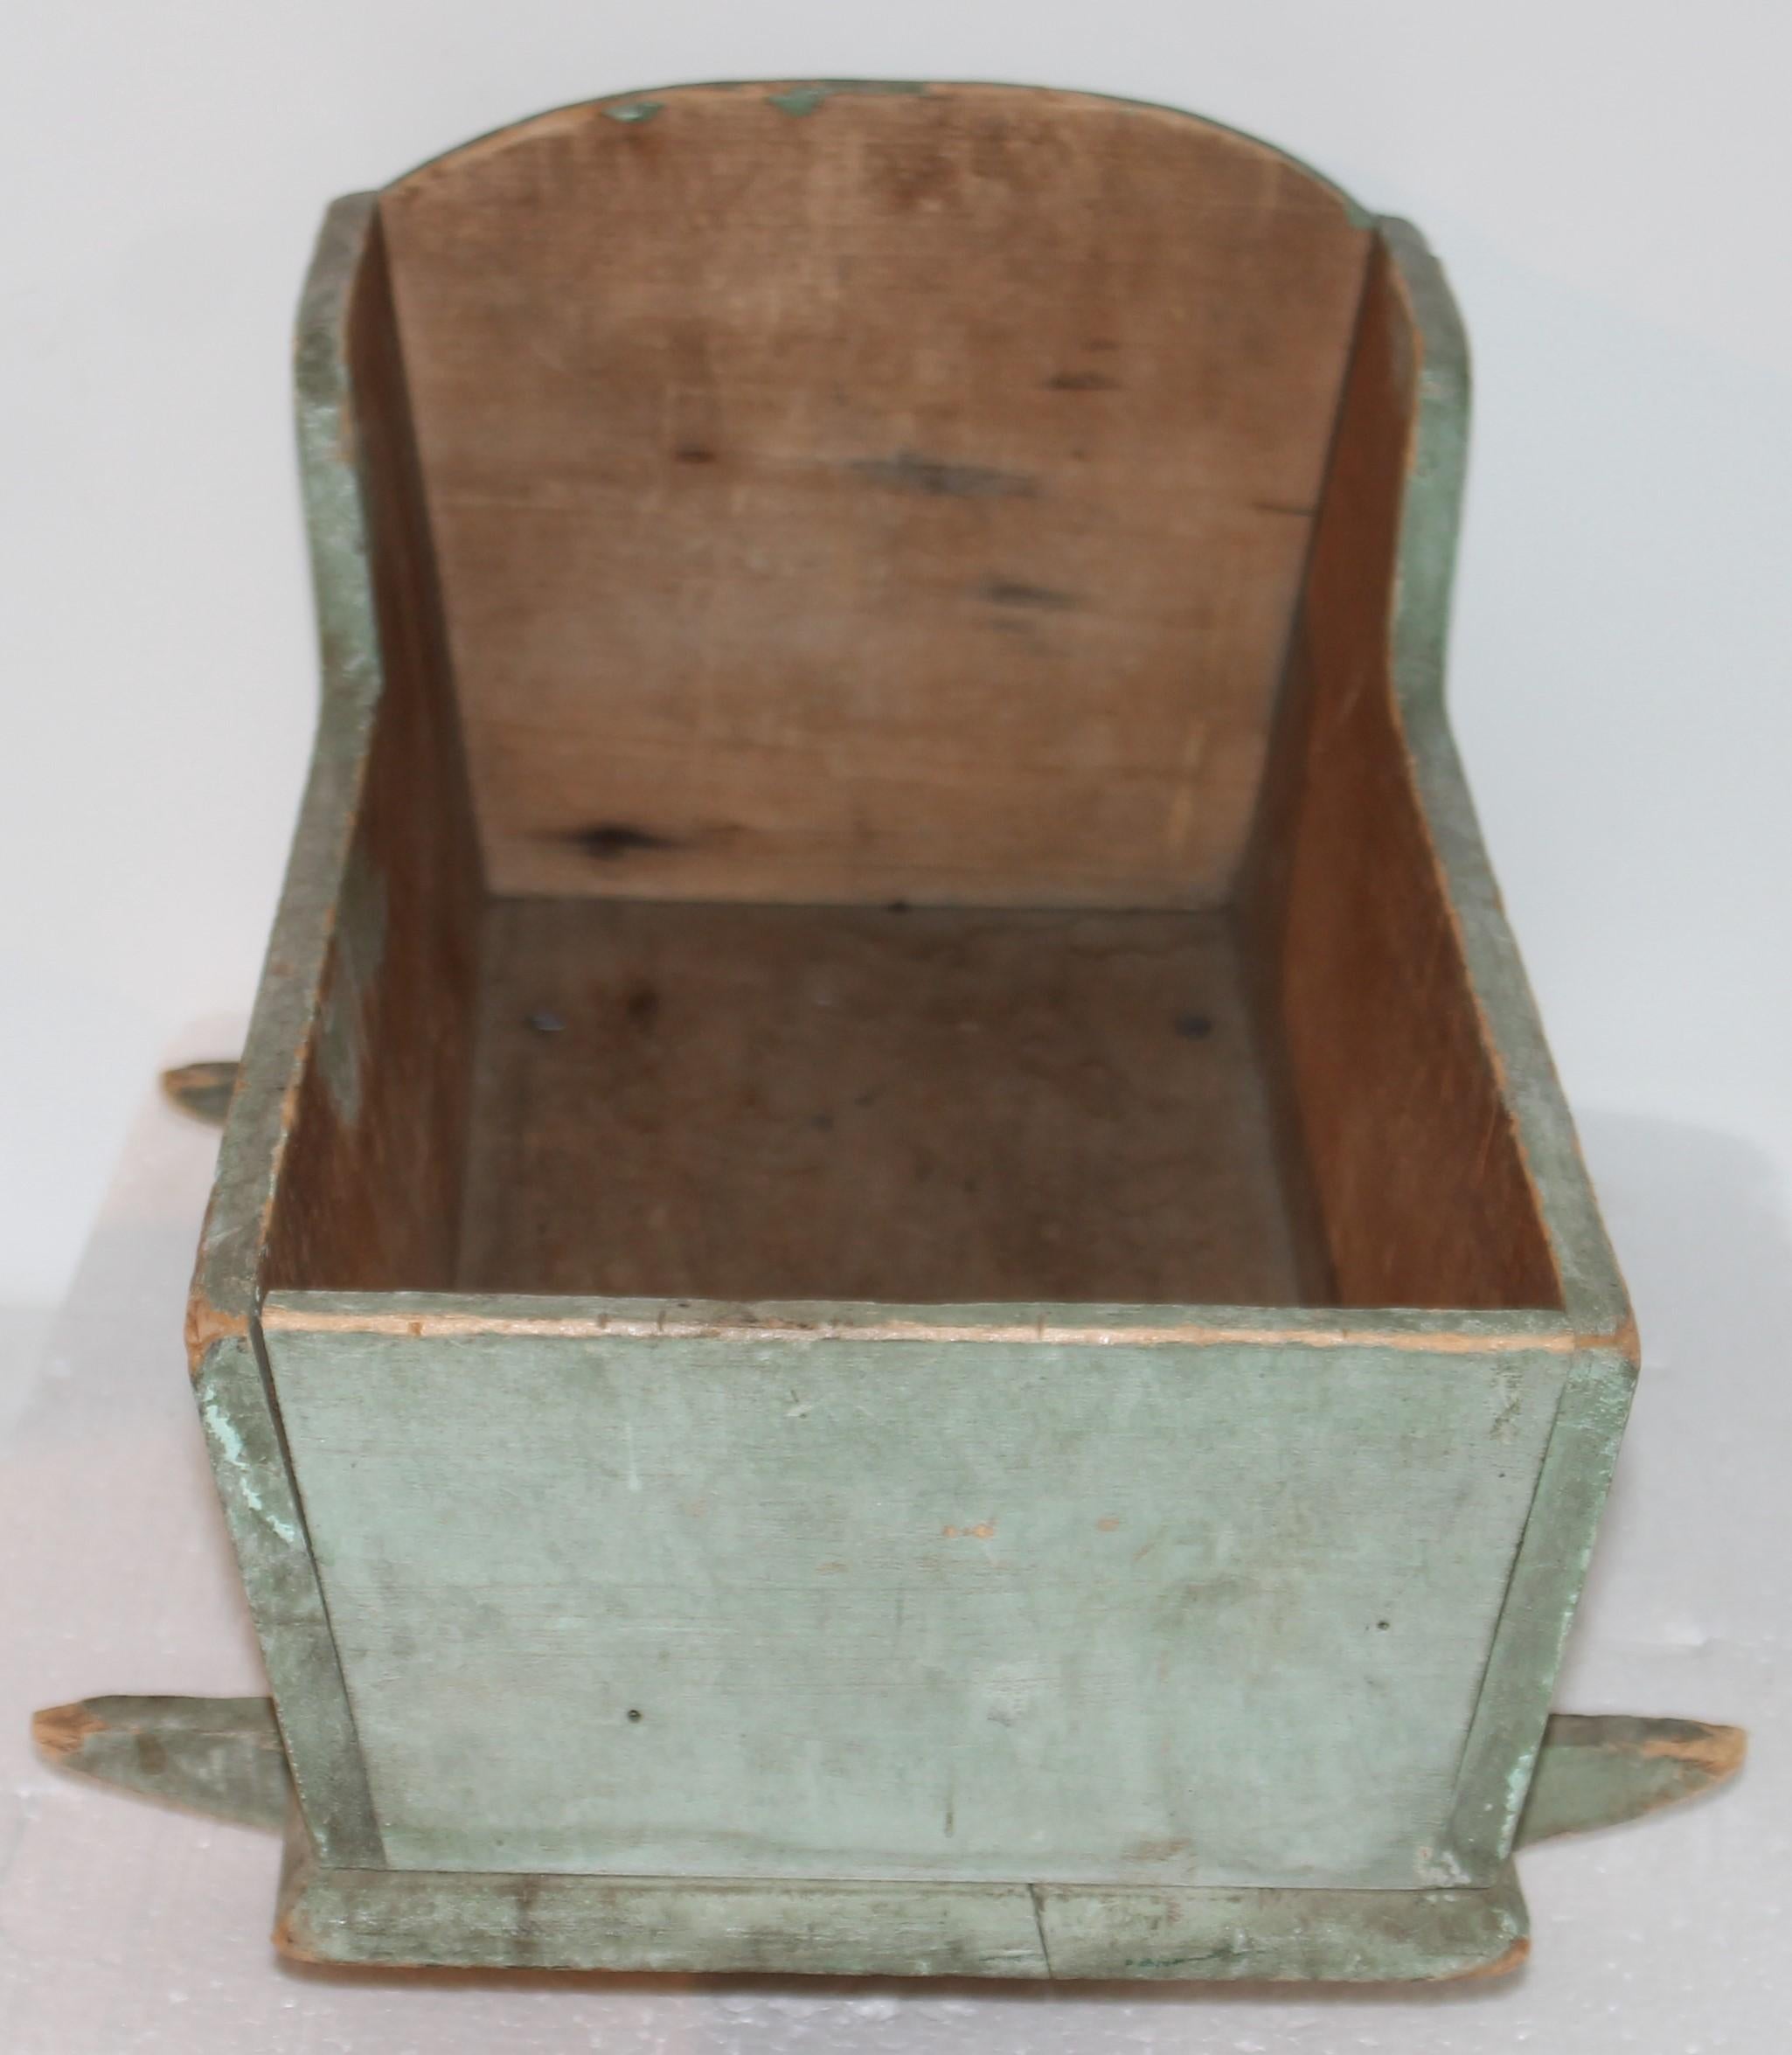 This fine handmade original blue/green doll cradle is in fine condition. It is a dry original first coat of paint and square nail construction. Fantastic form and undisturbed surface.